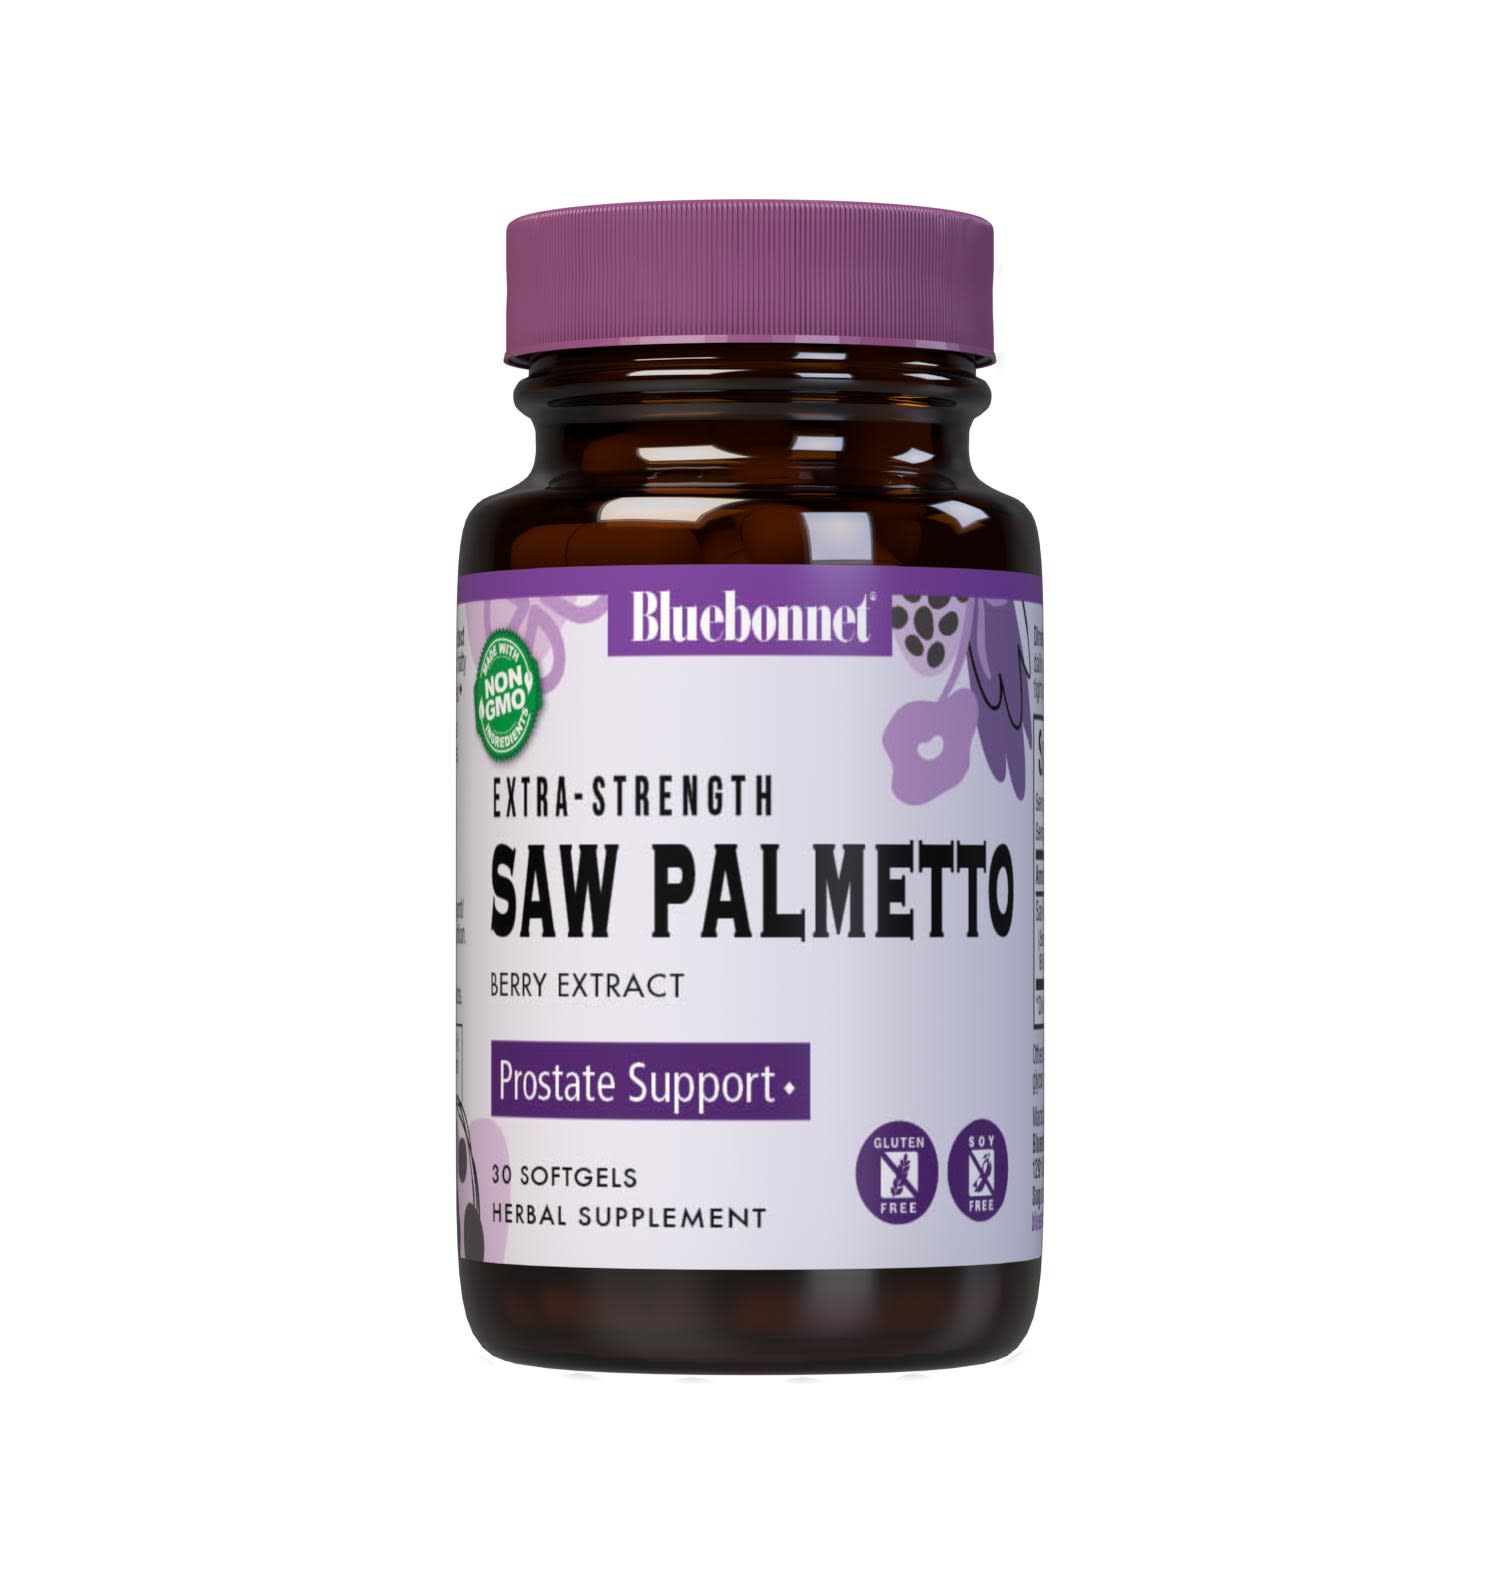 Bluebonnet’s Extra-Strength Saw Palmetto Berry Extract 30 Softgels contain a standardized extract of fatty acids and active sterols, the most researched active constituents found in saw palmetto. A clean and gentle supercritical CO2 extraction method is employed to capture and preserve saw palmetto’s most valuable components. #size_30 count